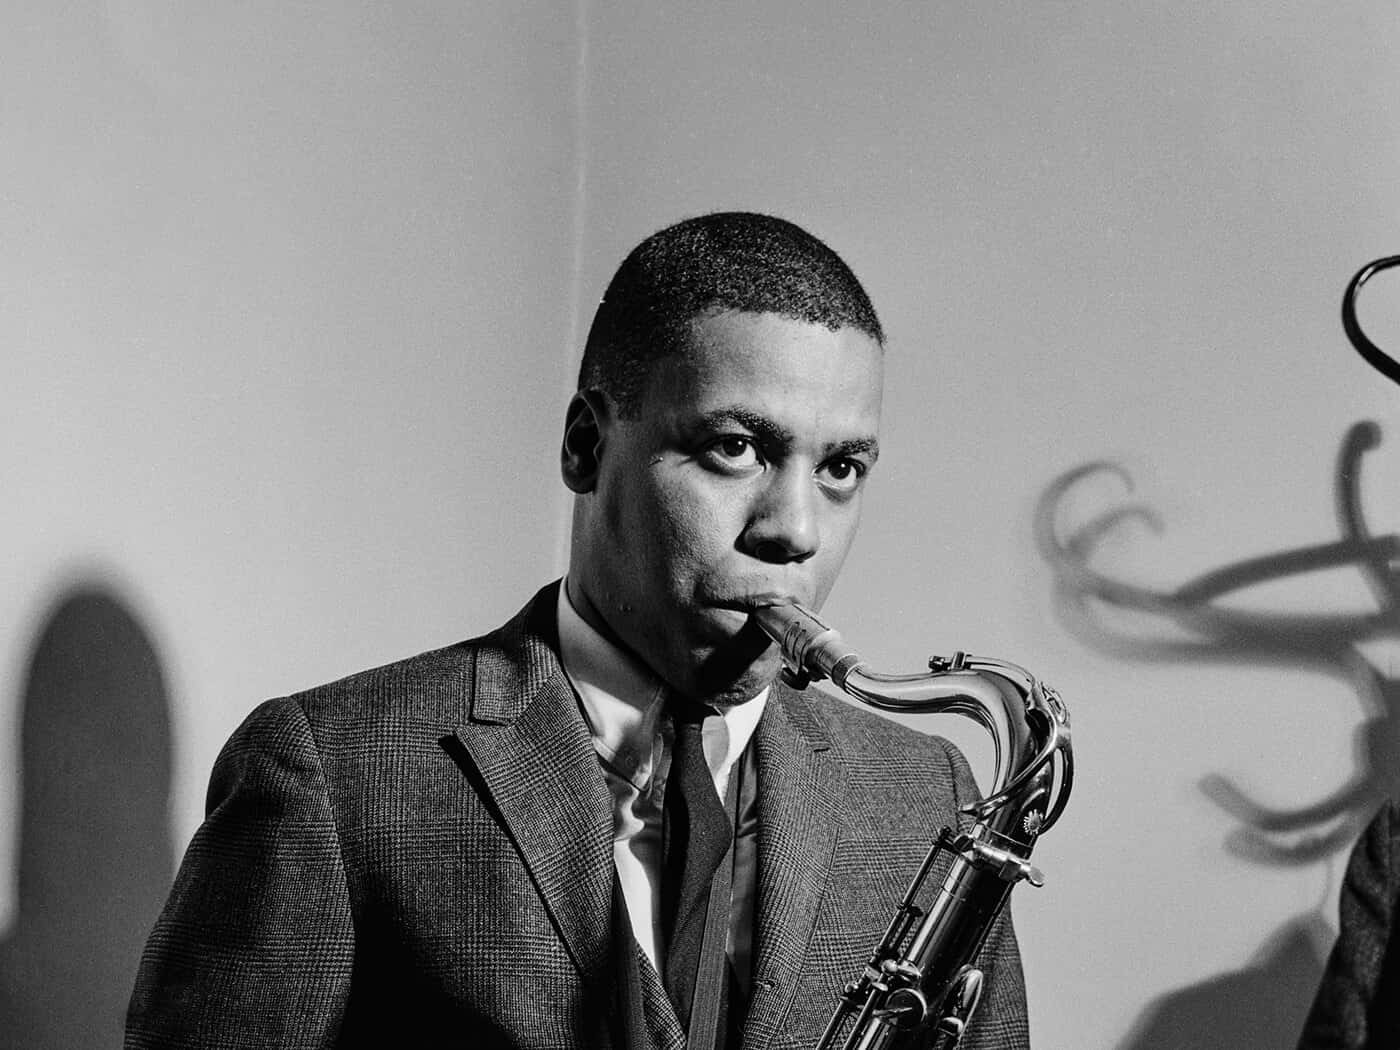 Wayne Shorter performing on stage with his saxophone Wallpaper